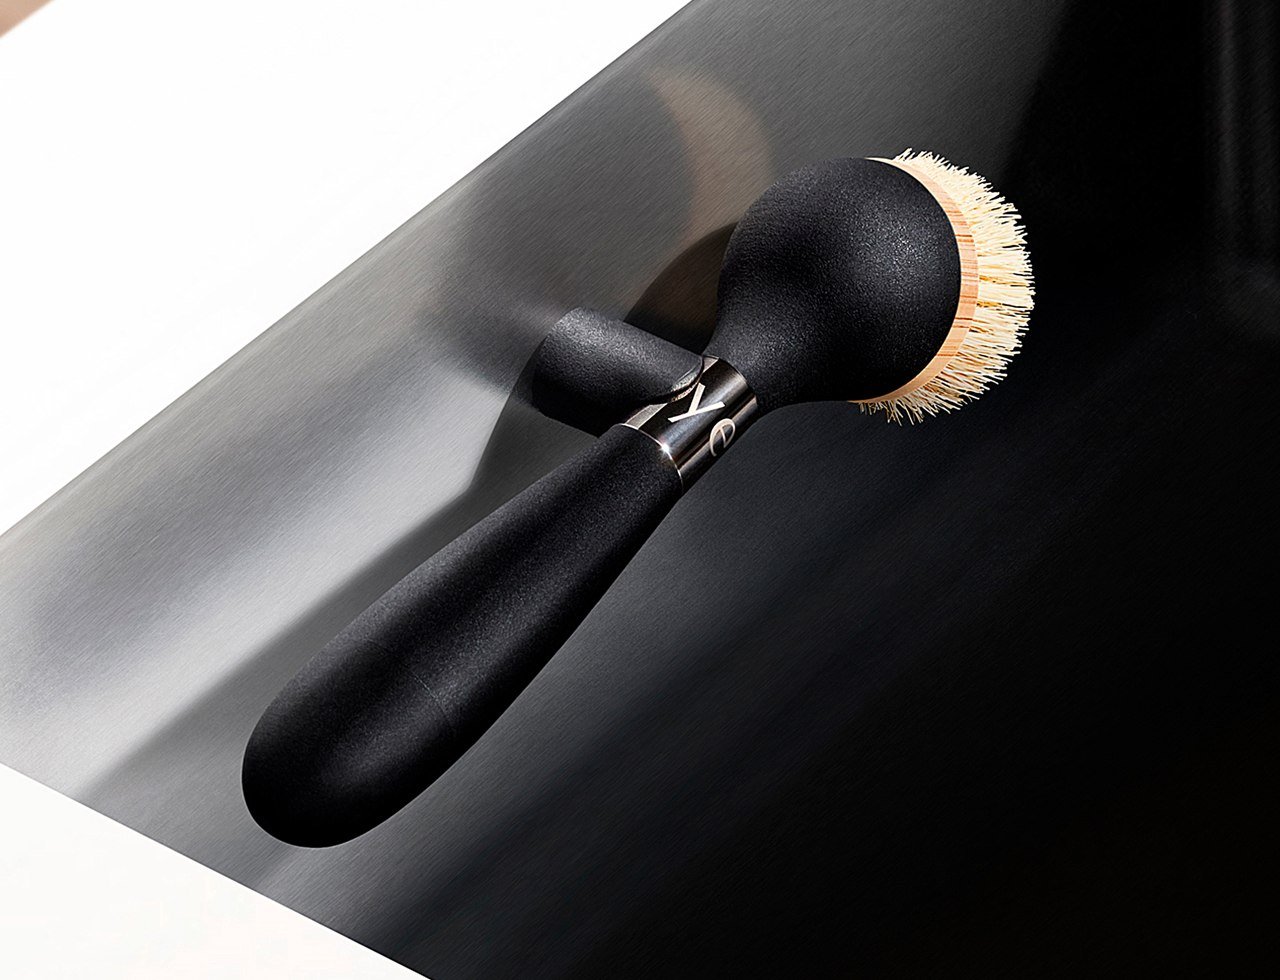 https://www.yankodesign.com/images/design_news/2021/12/magnetic_dish_brush_conveniently_hides_in_the_sink_02.jpg